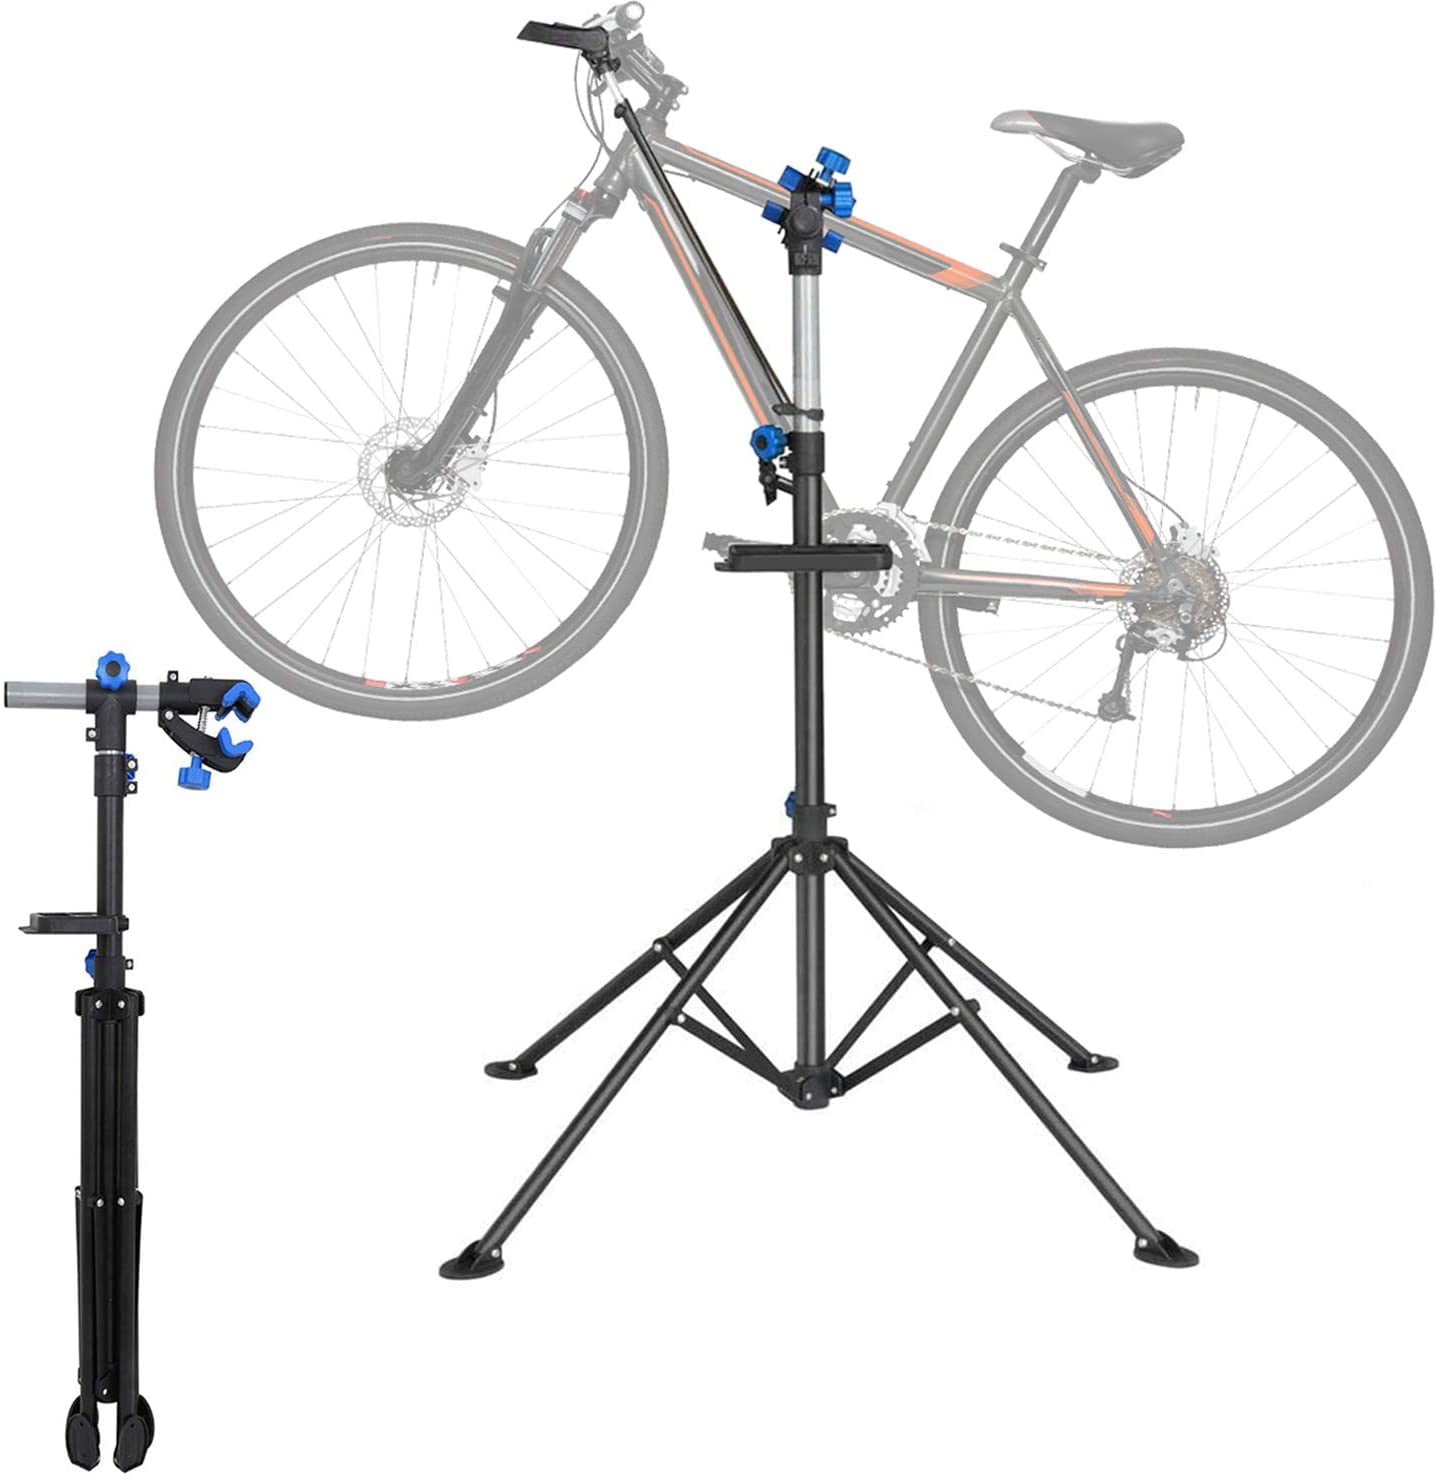 Bicycle Tripod-a High-Practical and Easy-to-Install Bicycle Tripod Made of High-Quality Materials